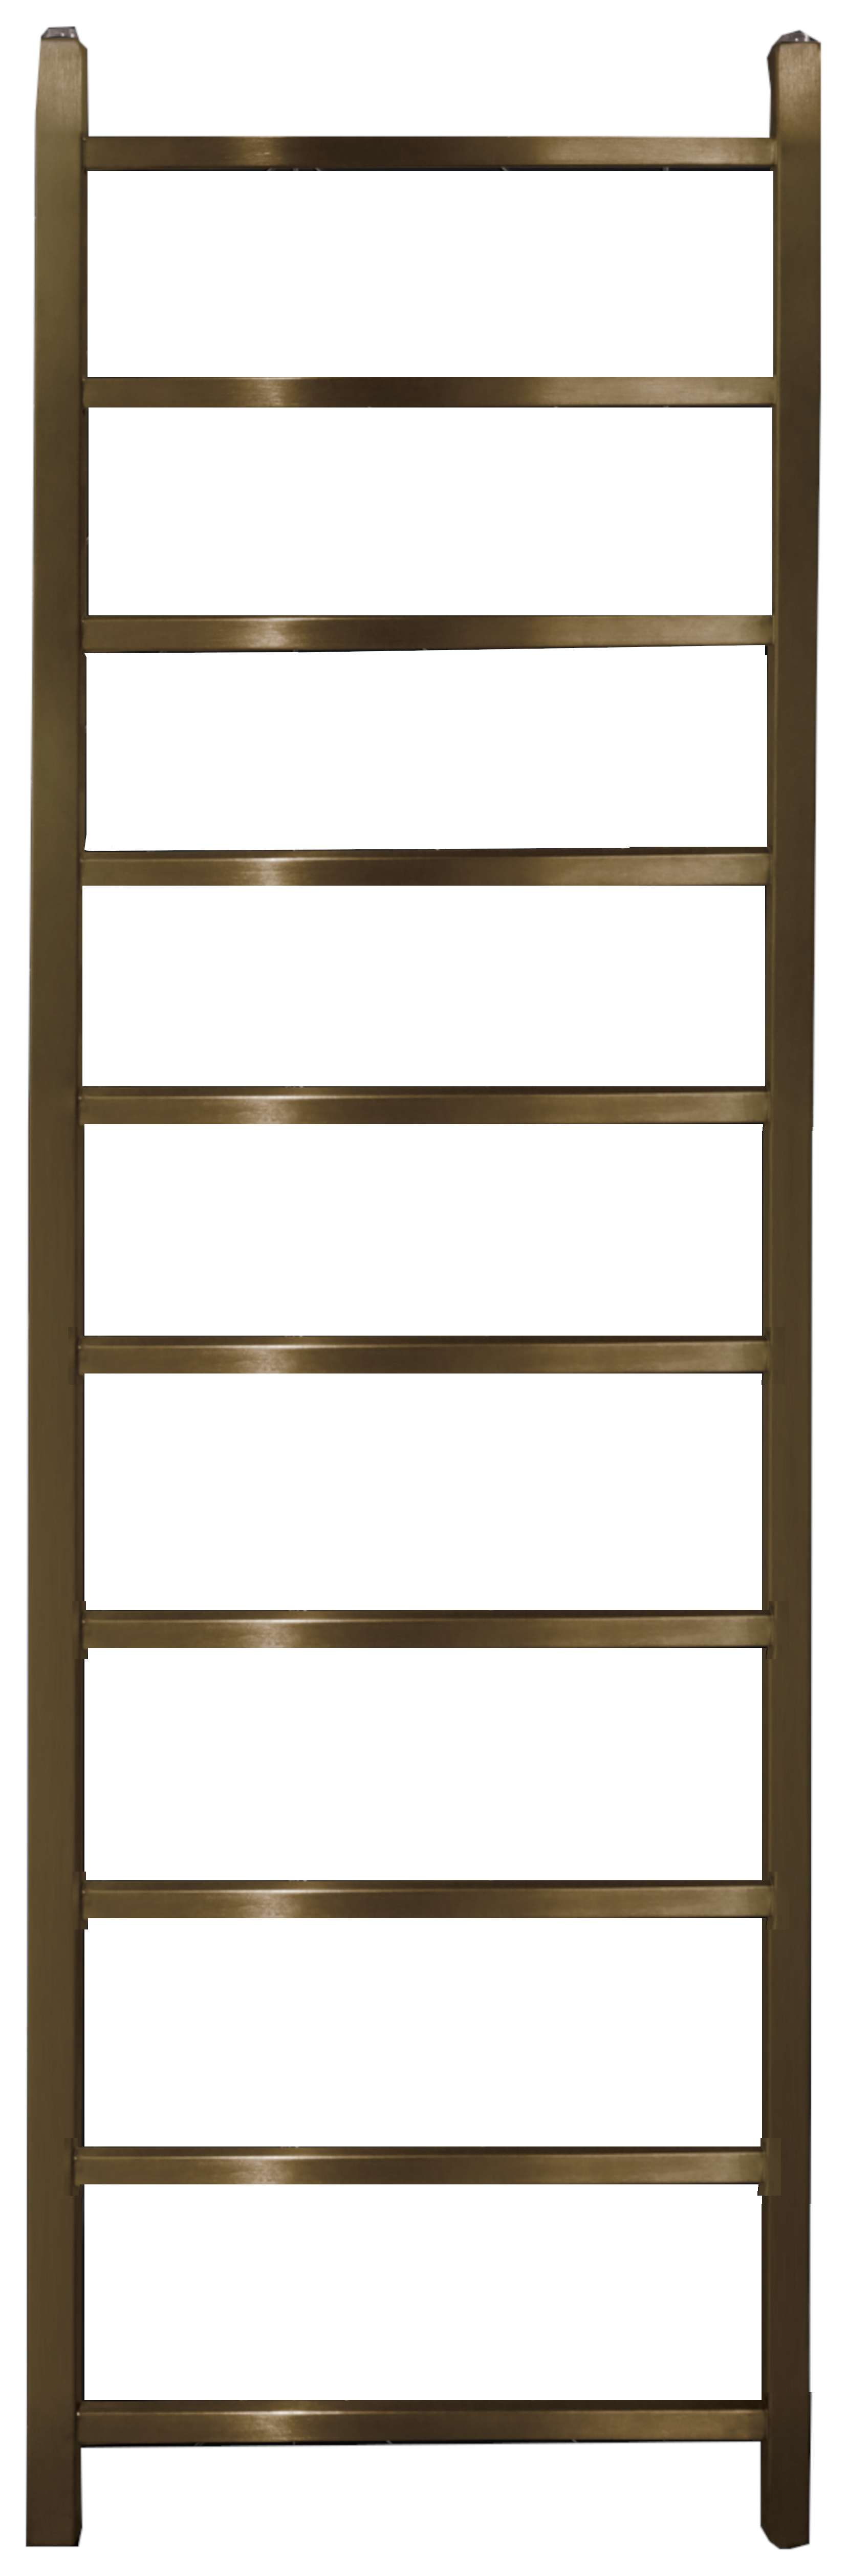 Towelrads Diva Brushed Brass Dry Electric Non Thermostatic Towel Radiator - 1500 x 500mm